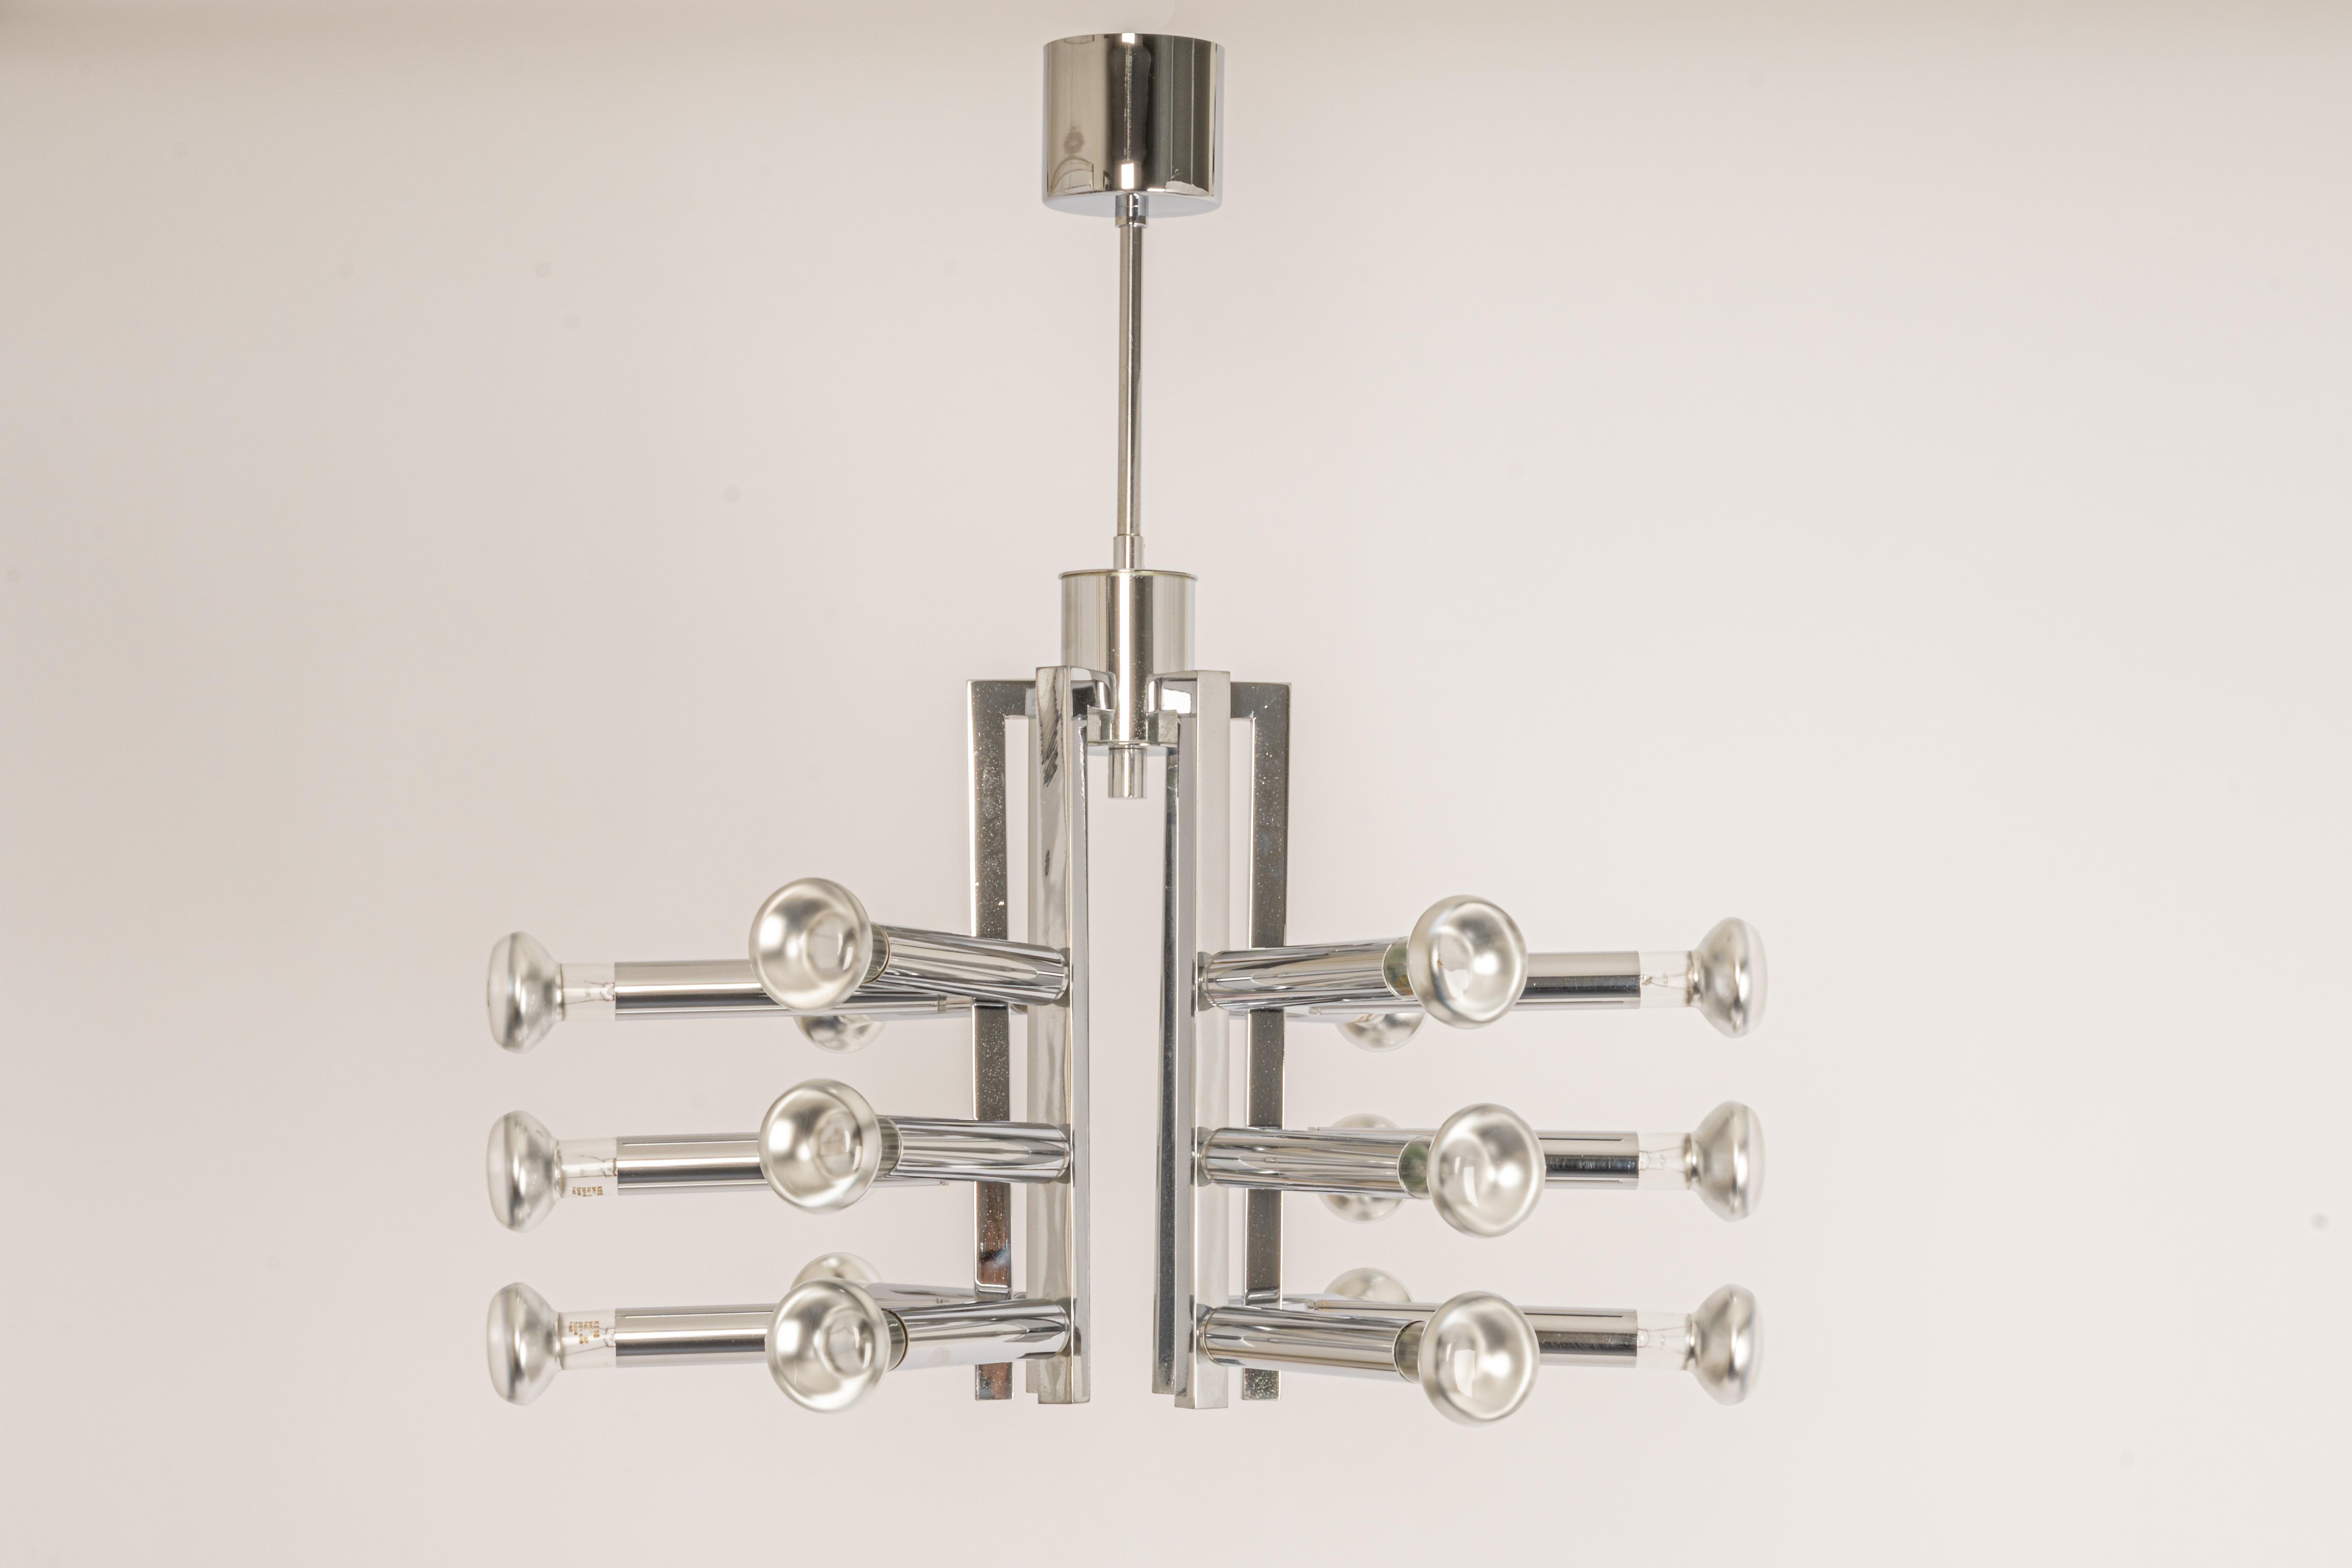 Large Chrome Space Age Sputnik Atomium Chandelier by Cosack, Germany, 1970s For Sale 5